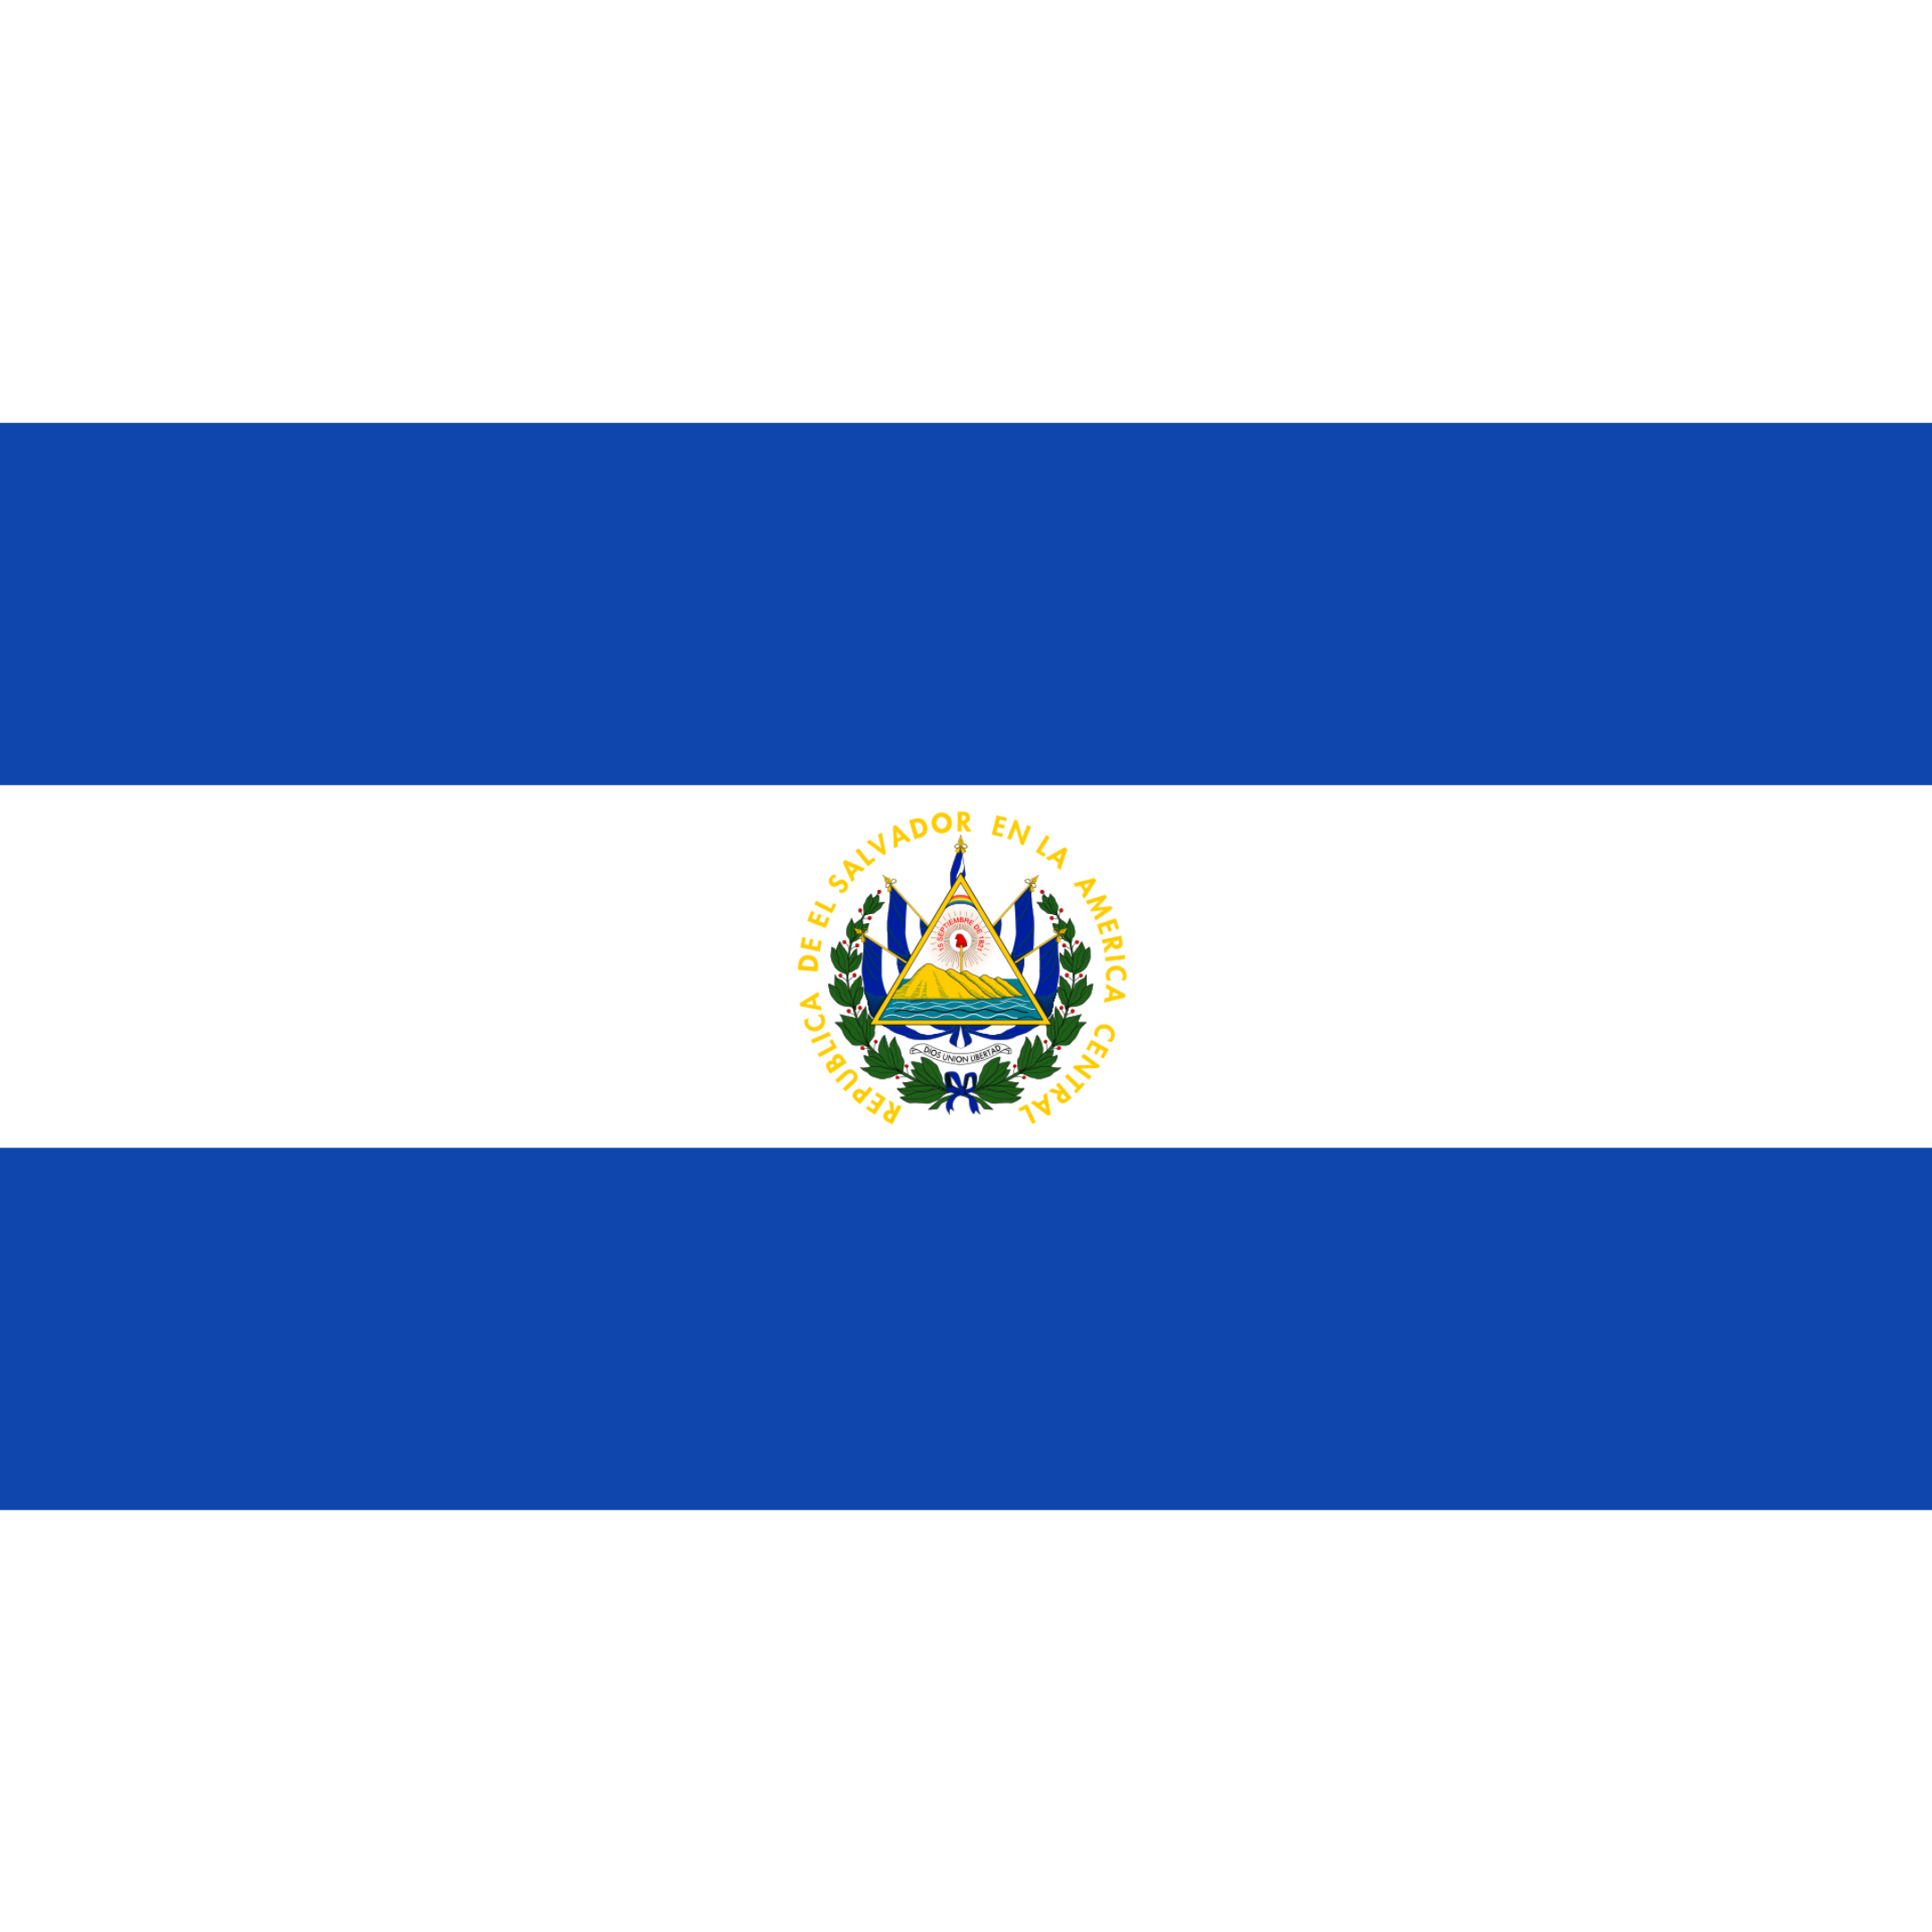 The El Salvador Flag is made of three horizontal bands in blue, white and blue, with a coat of arms in the central stripe. 